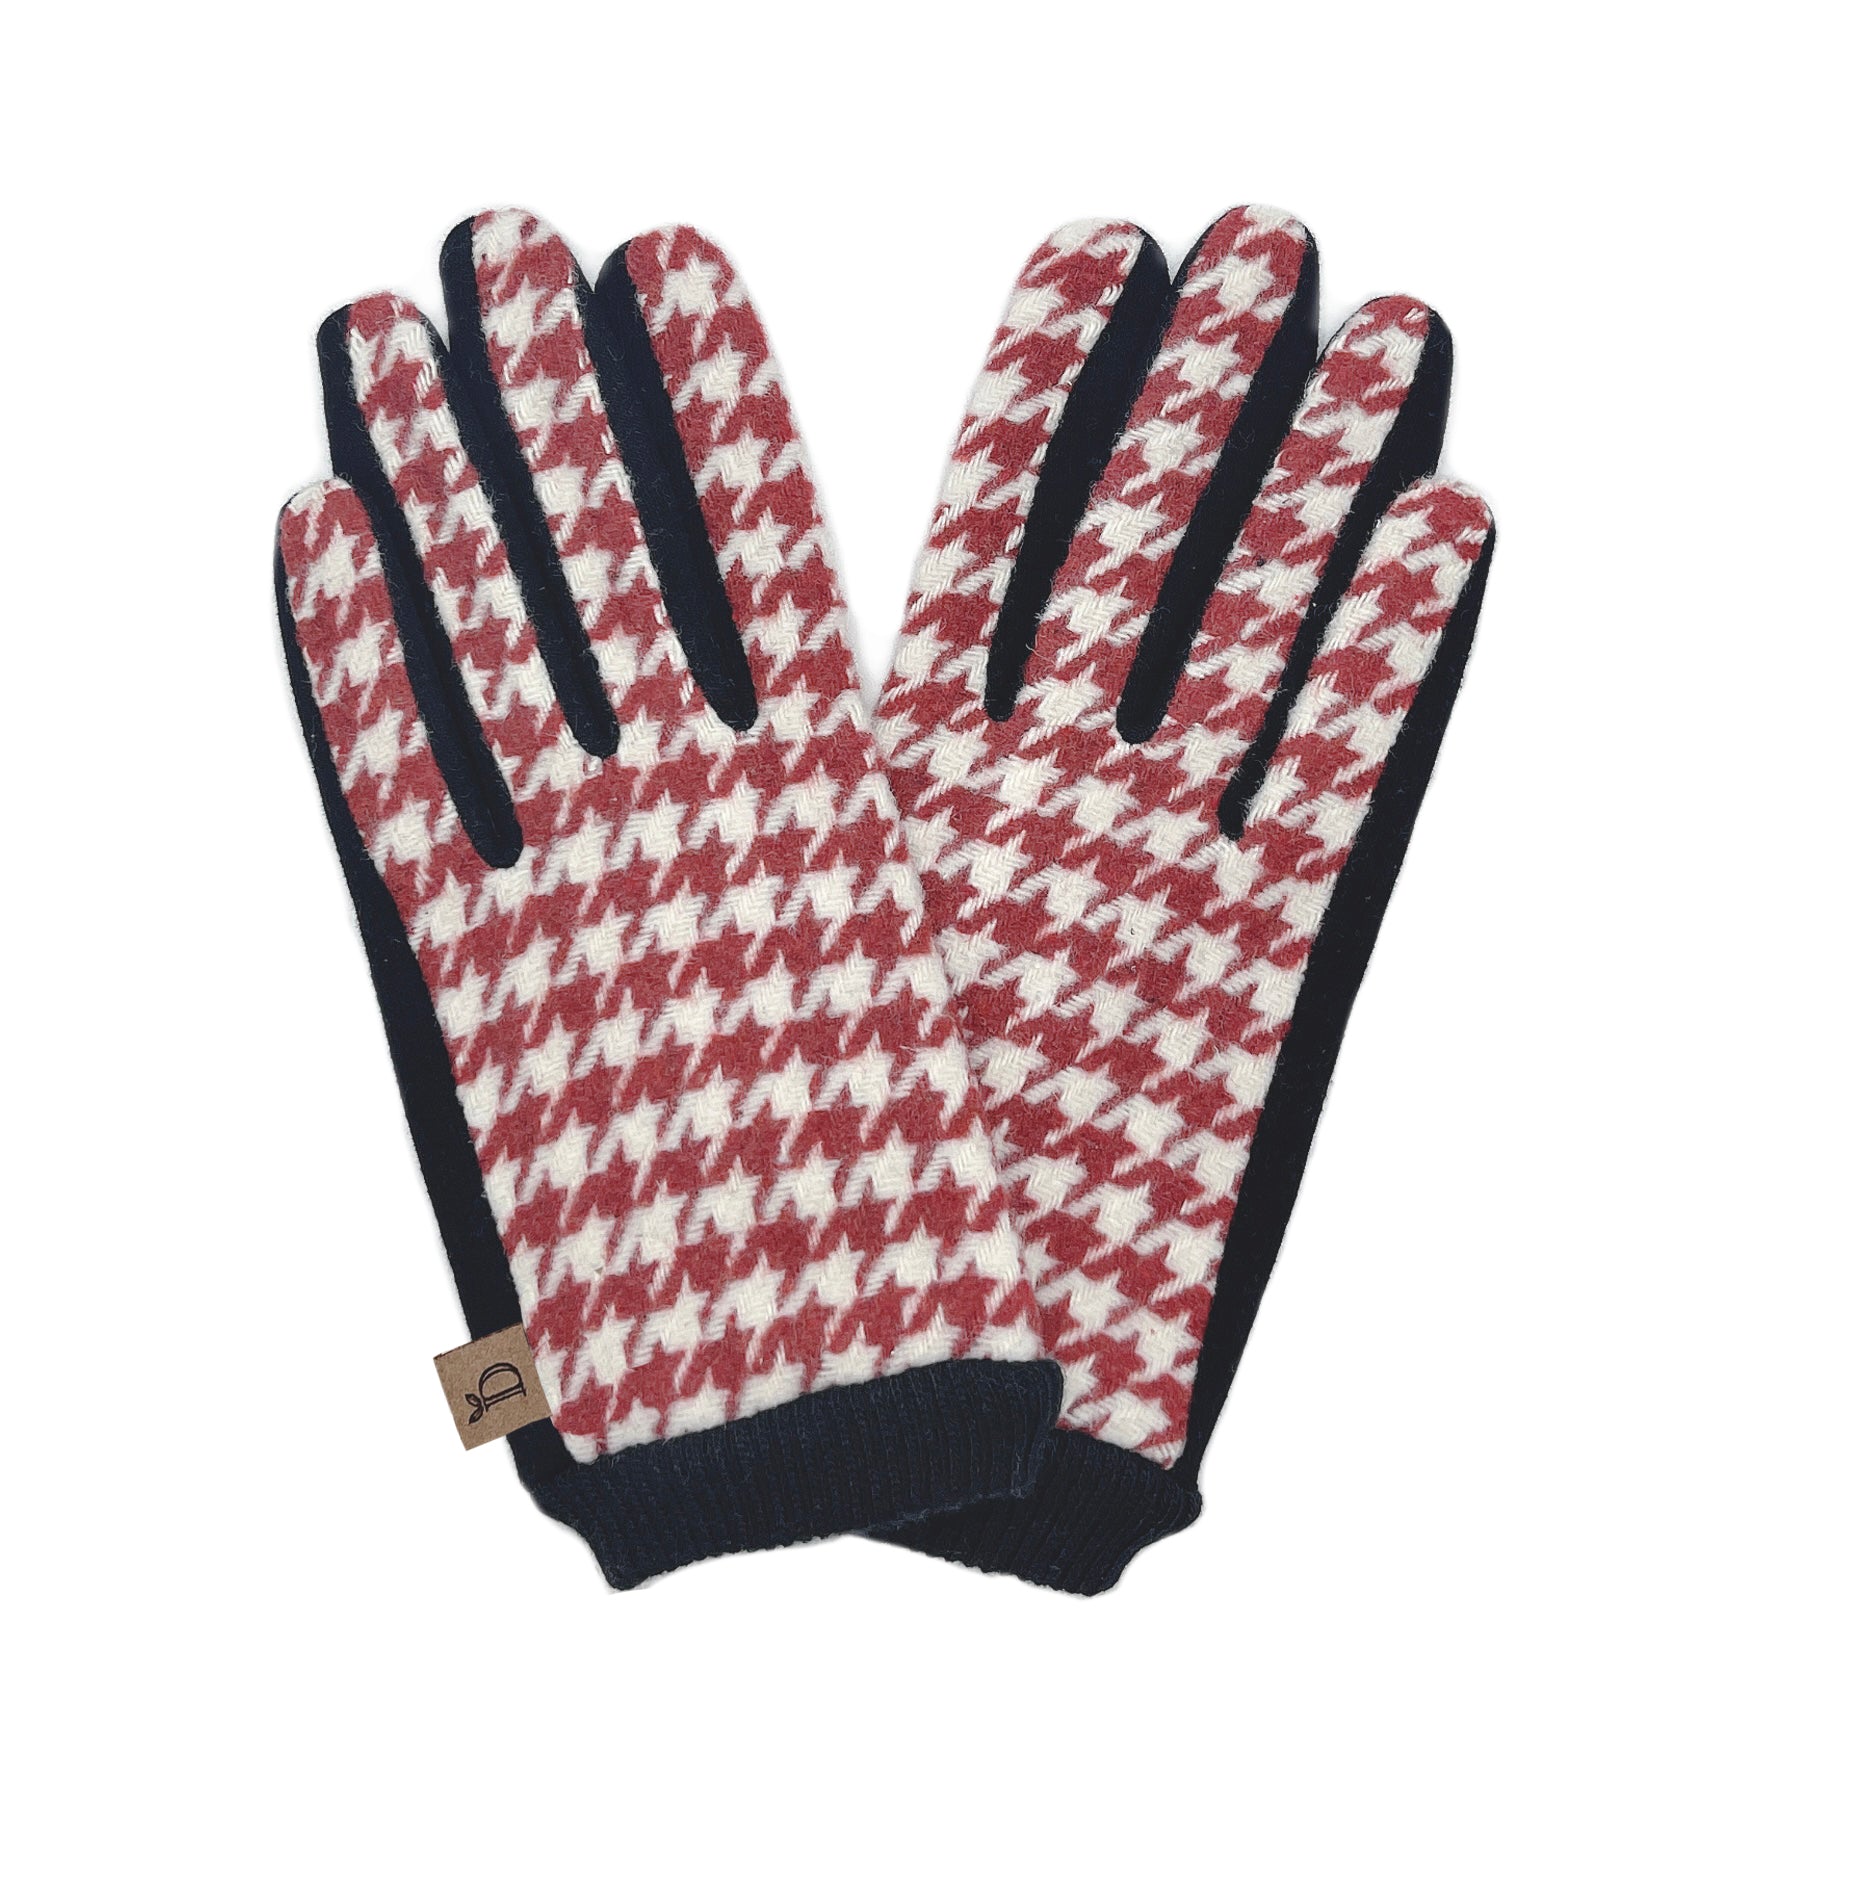 Shop for KW Fashion Houndstooth Touch Gloves at doeverythinginloveny.com wholesale fashion accessories